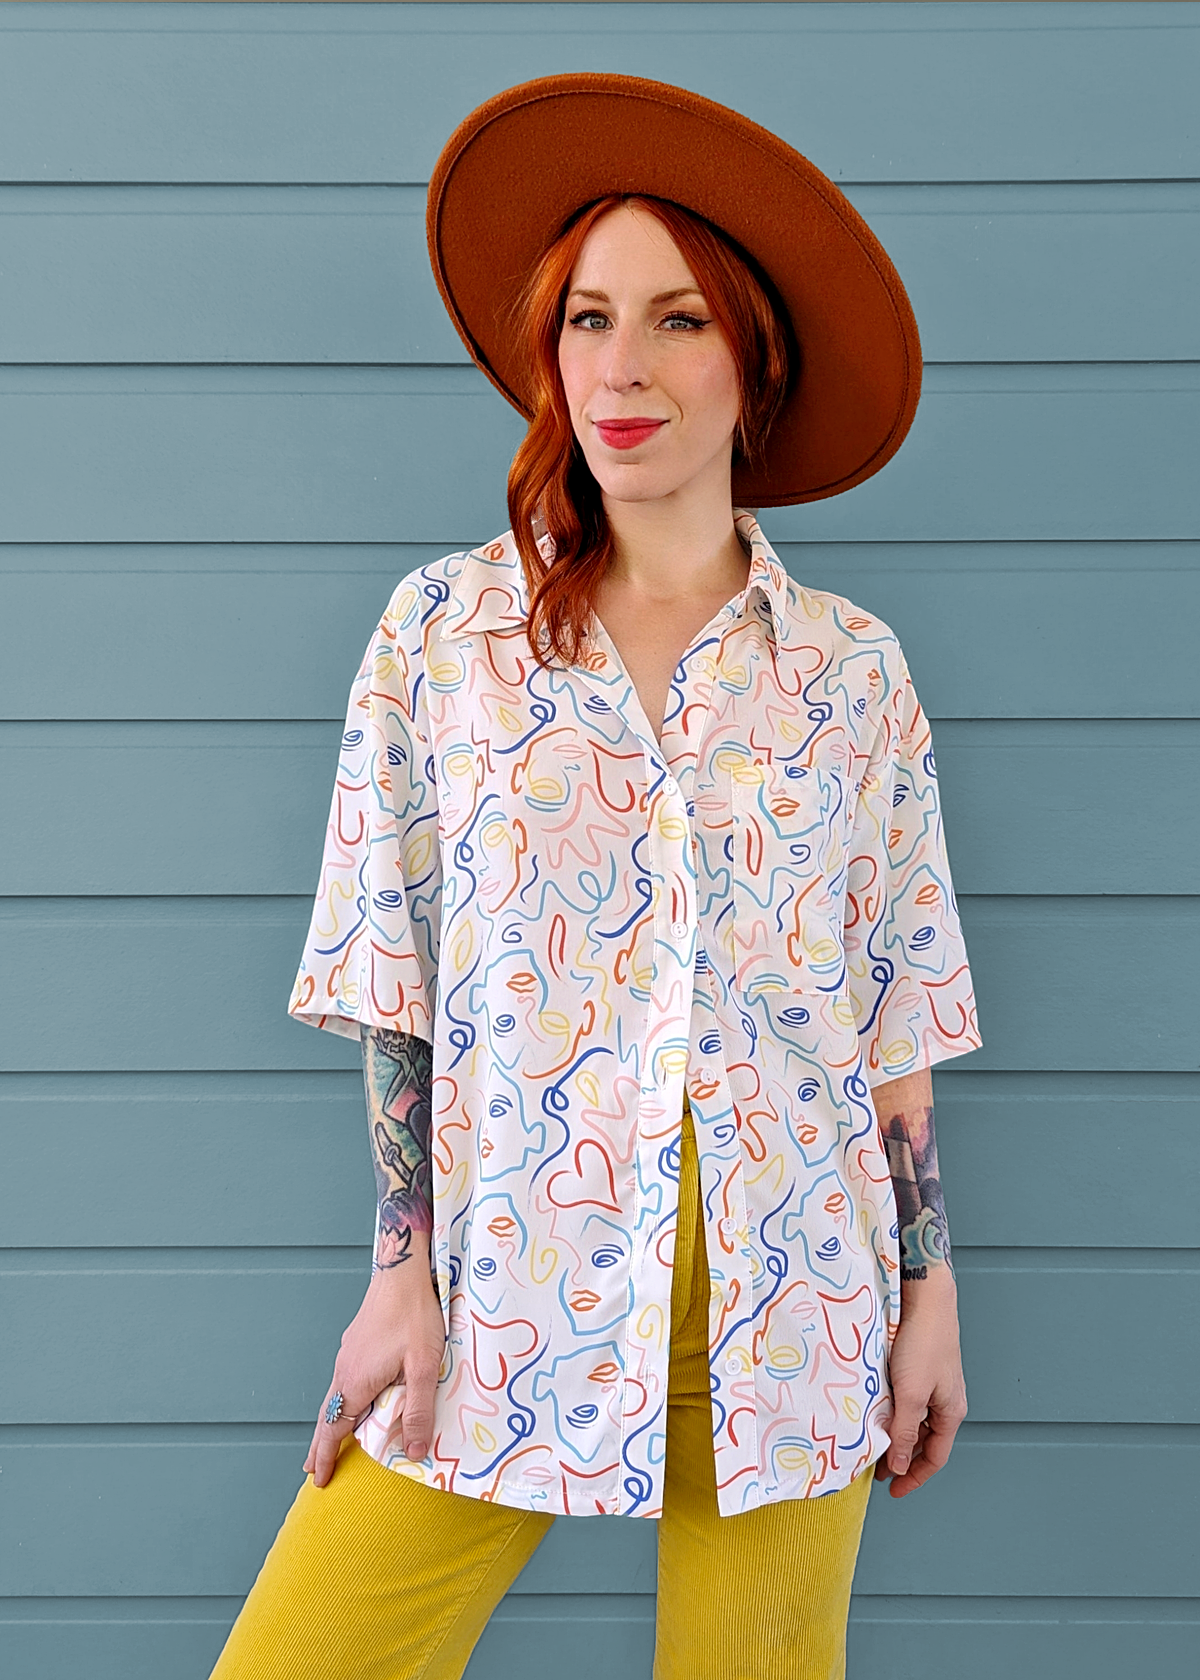 80s style oversized collared button up shirt with abstract rainbow face pattern by Glamorous UK